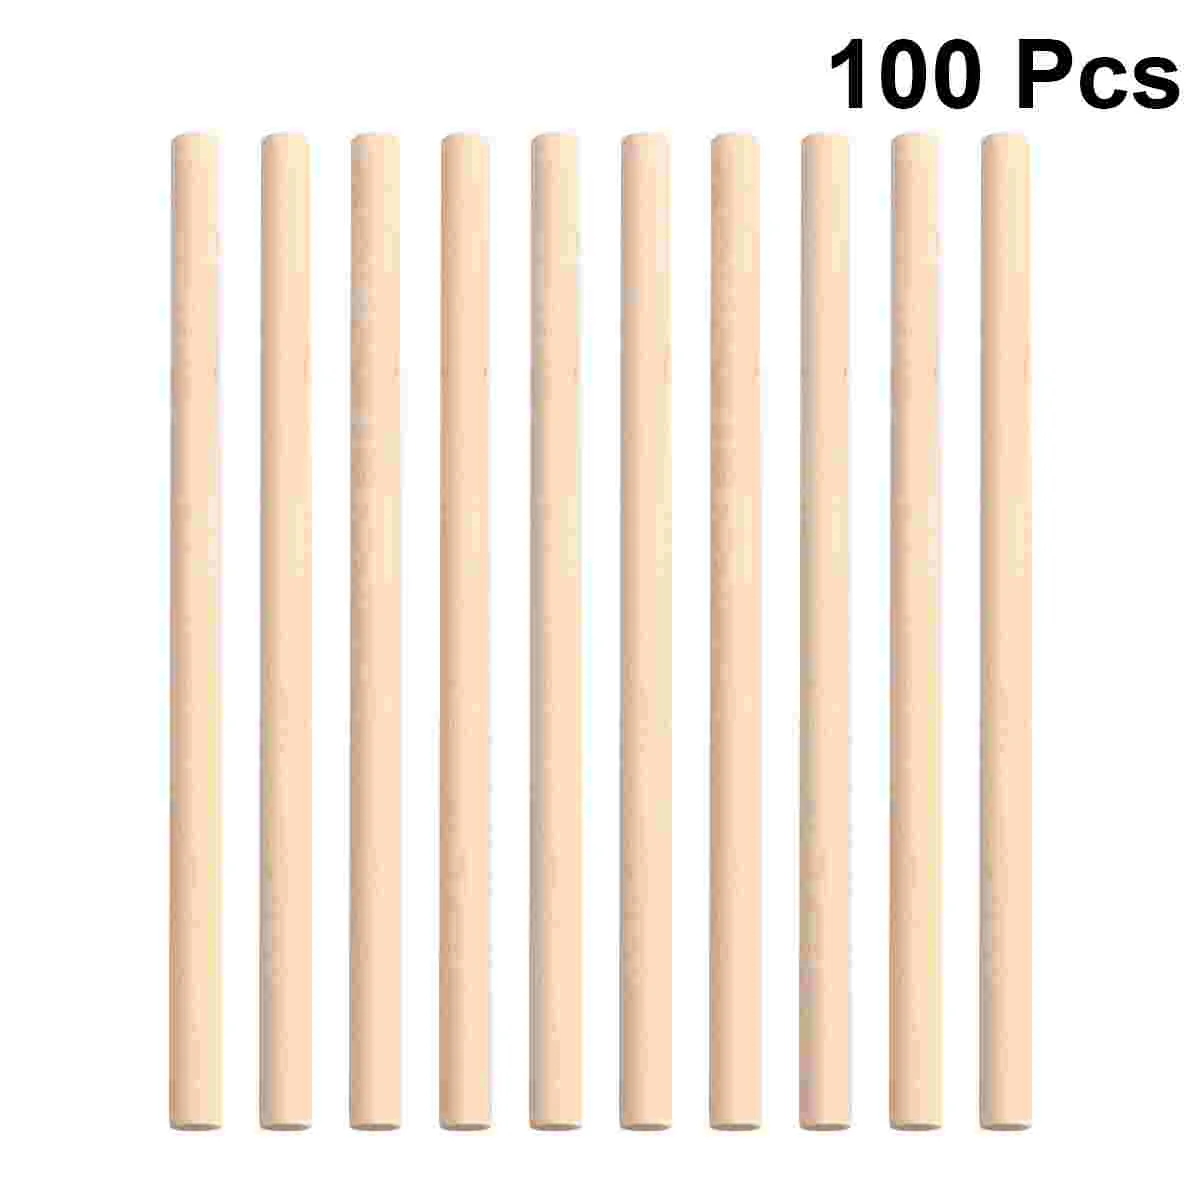 

Wooden Rods Sticks Dowels Crafts Dowel Craft Cake Stacking 2 Inch Round Wood Accessory